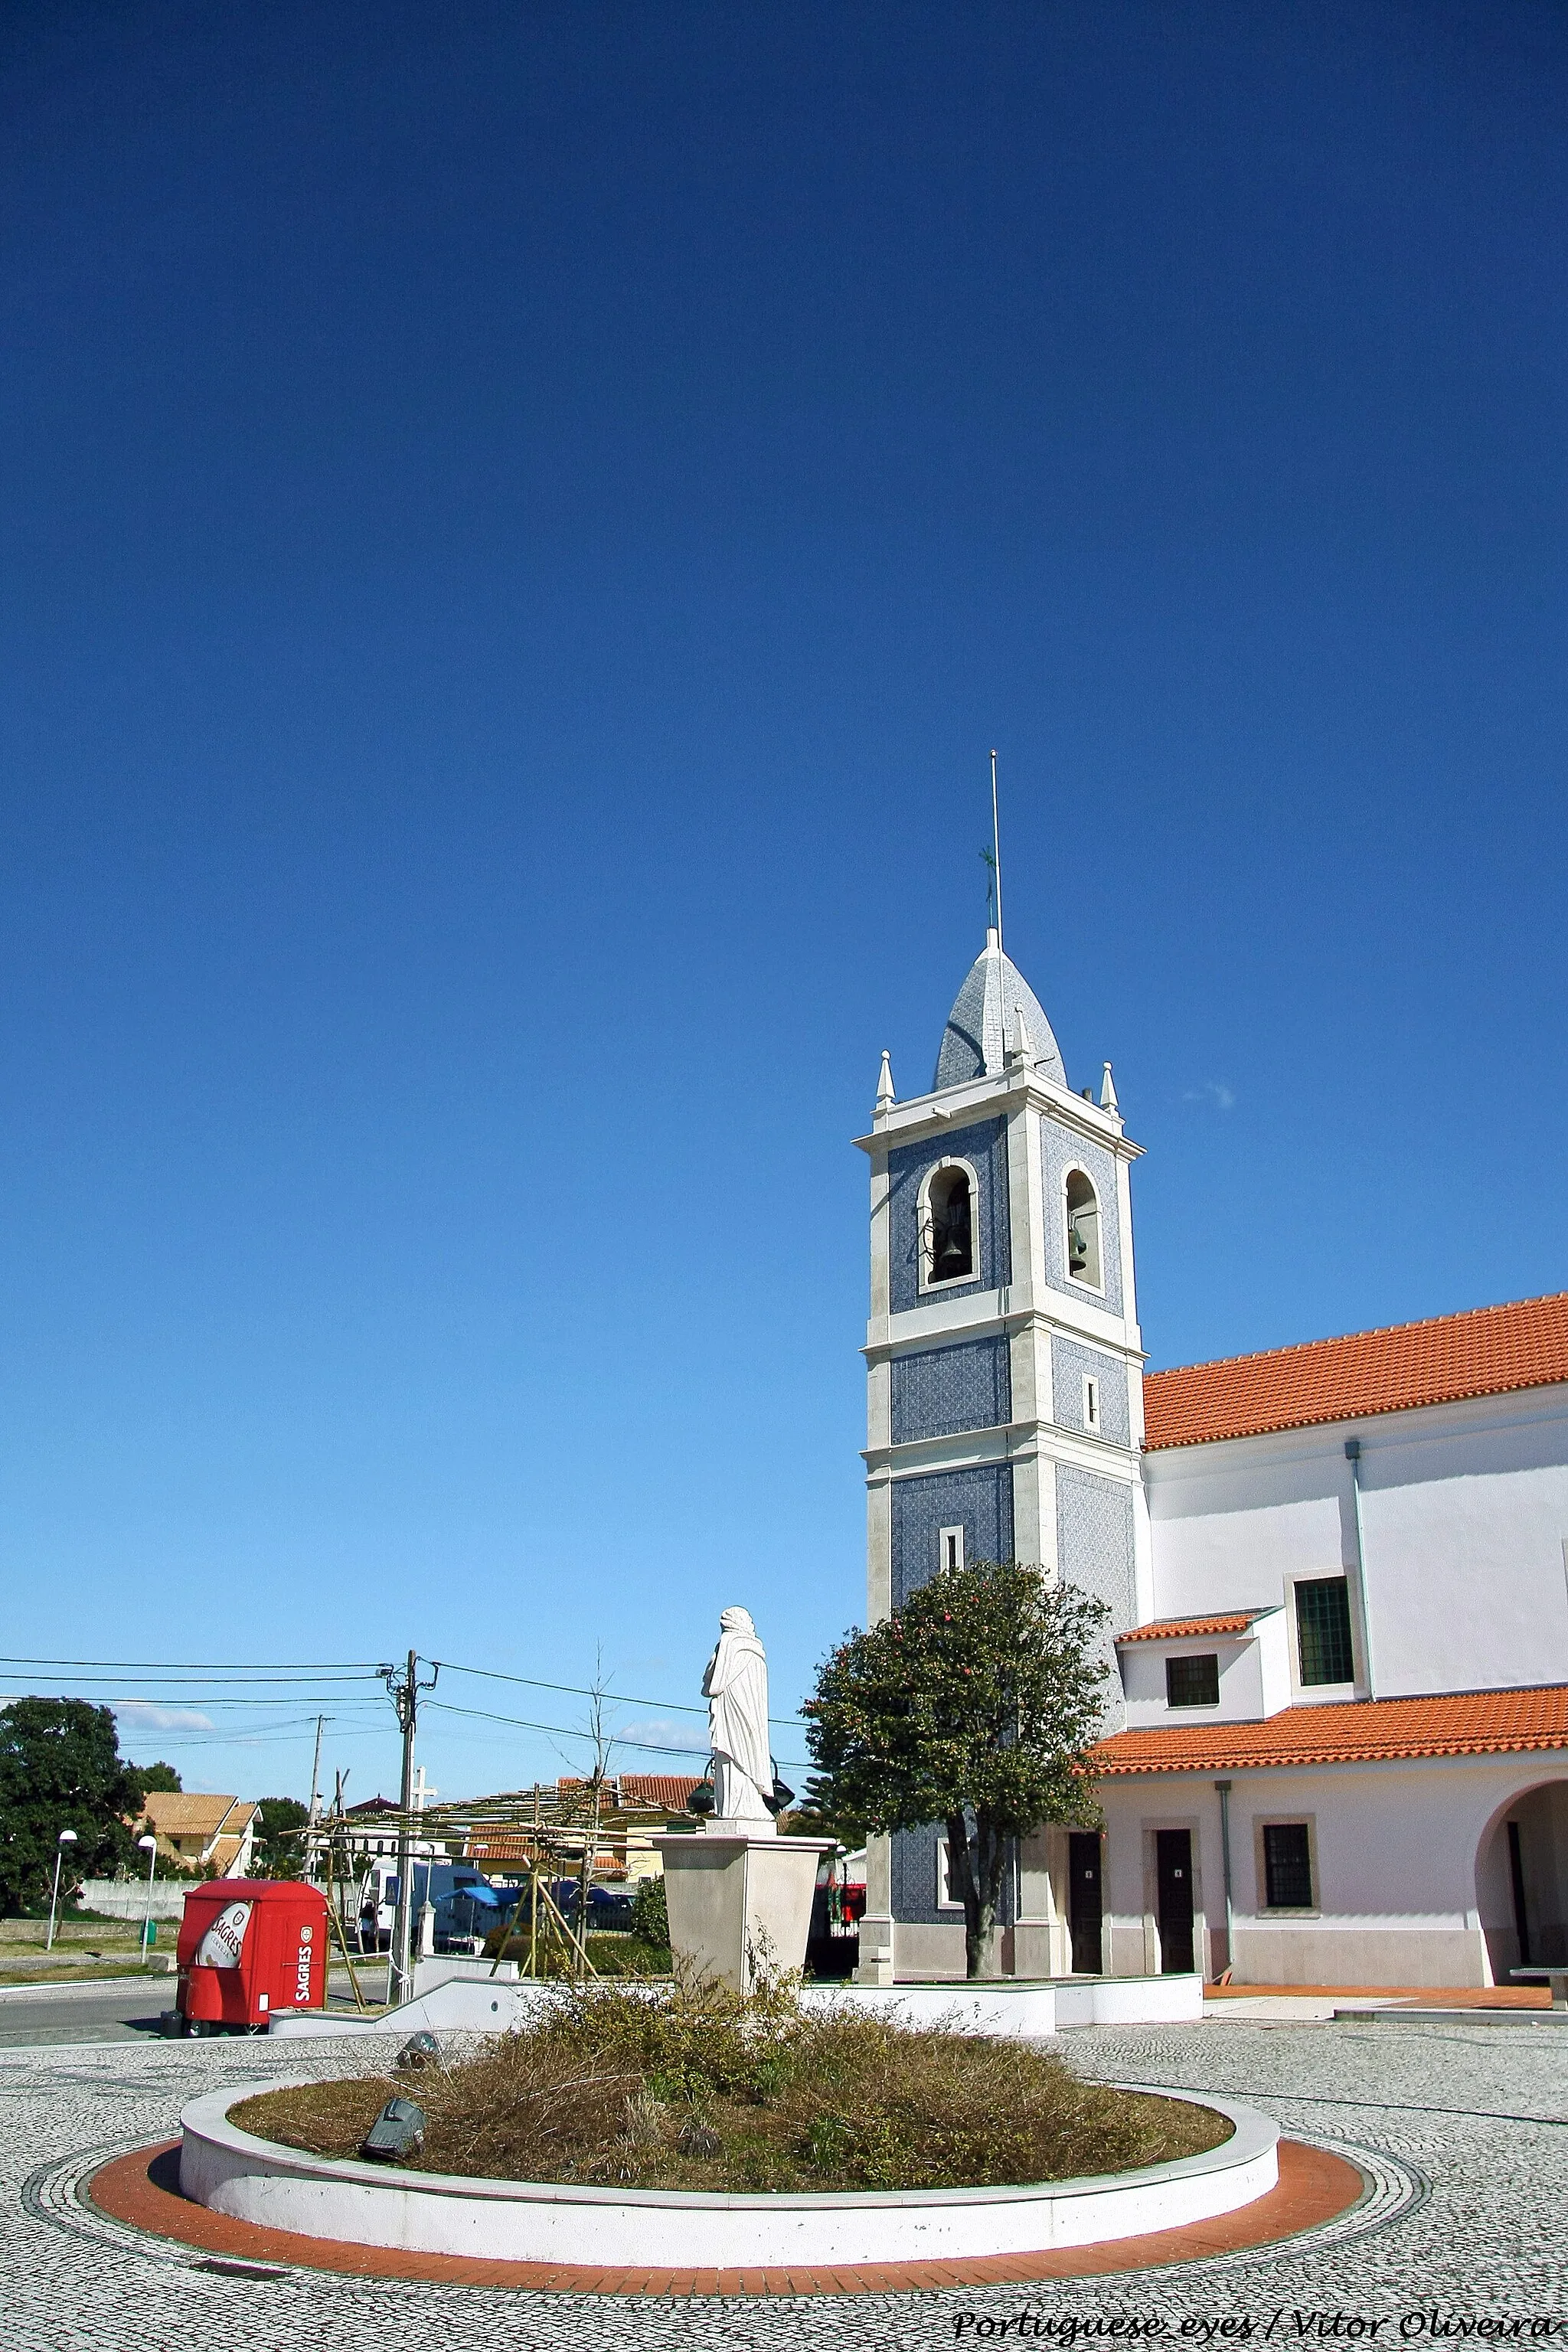 Image of Oiã